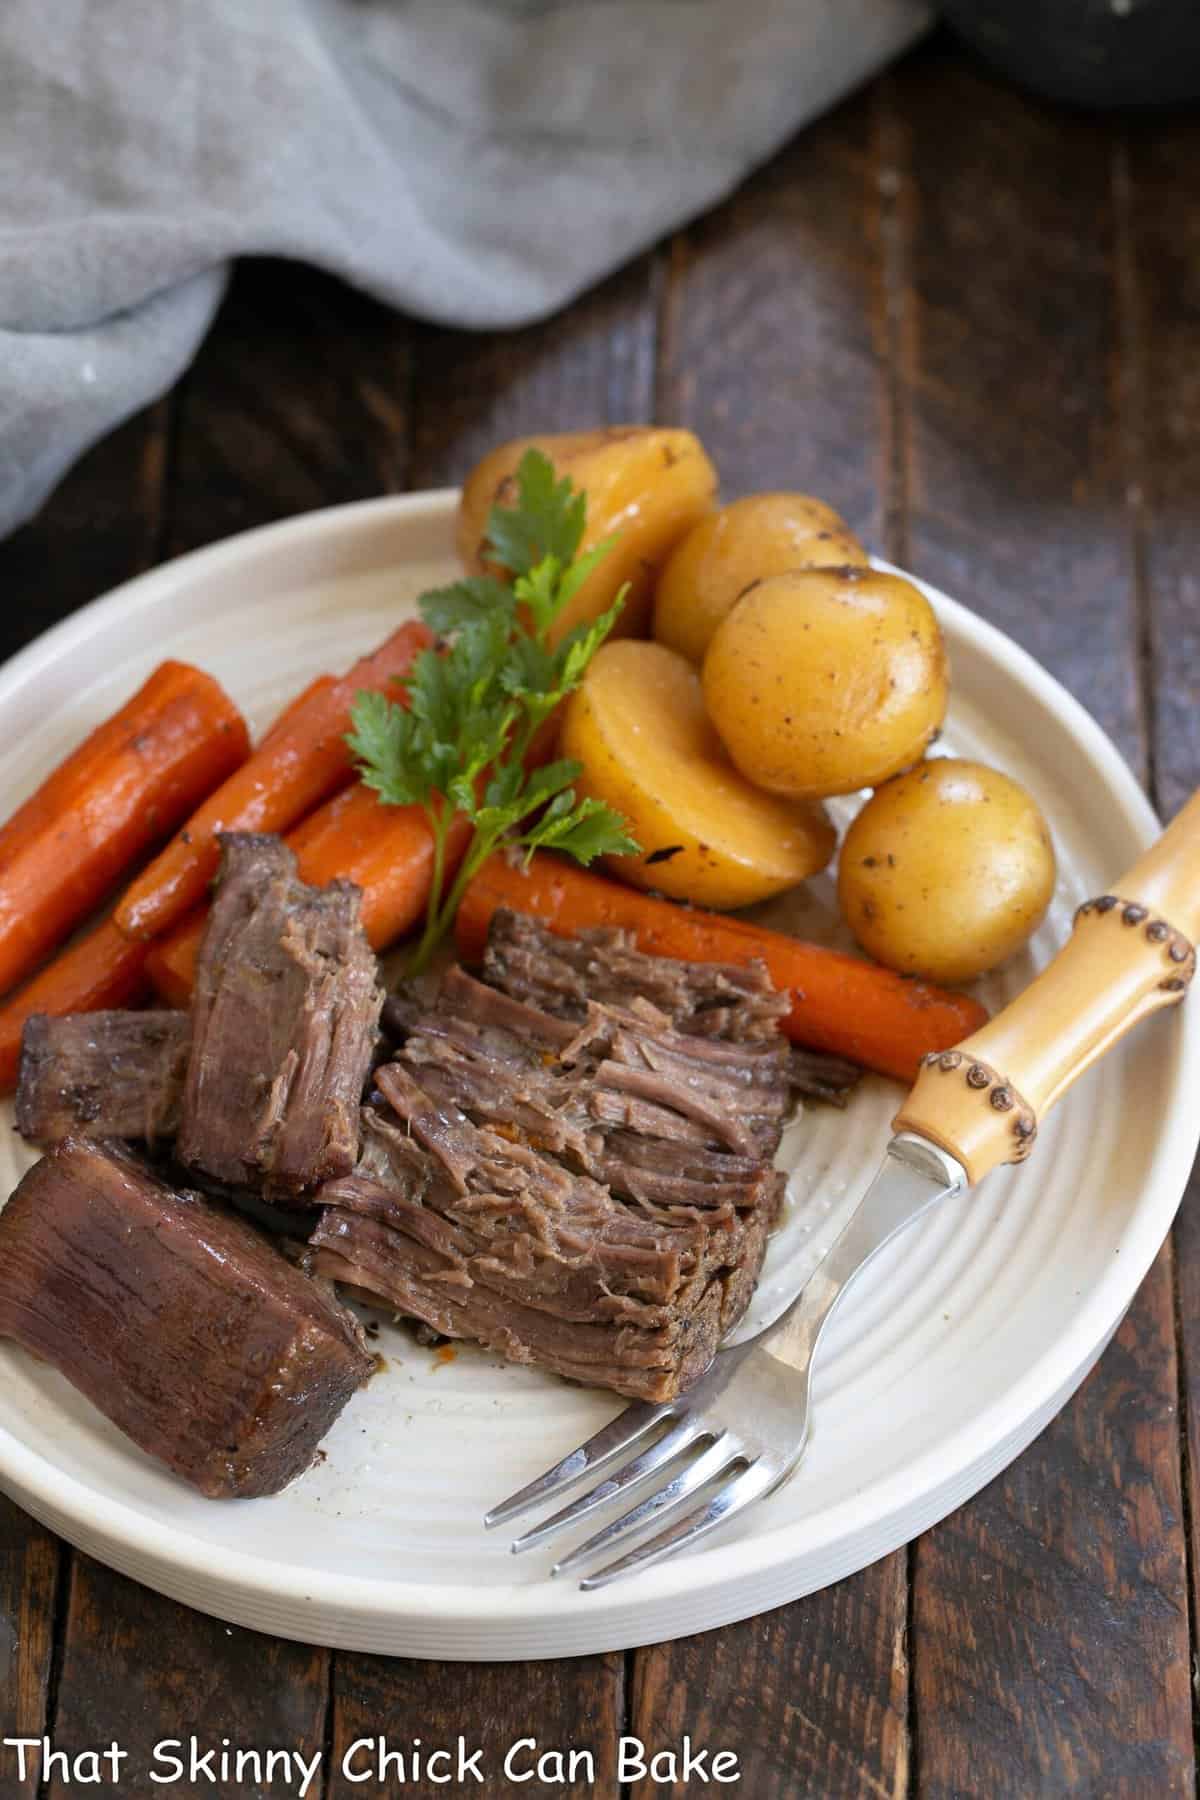 Beef pot roast on a white dinner plate with carrots potatoes and a bamboo handle fork.